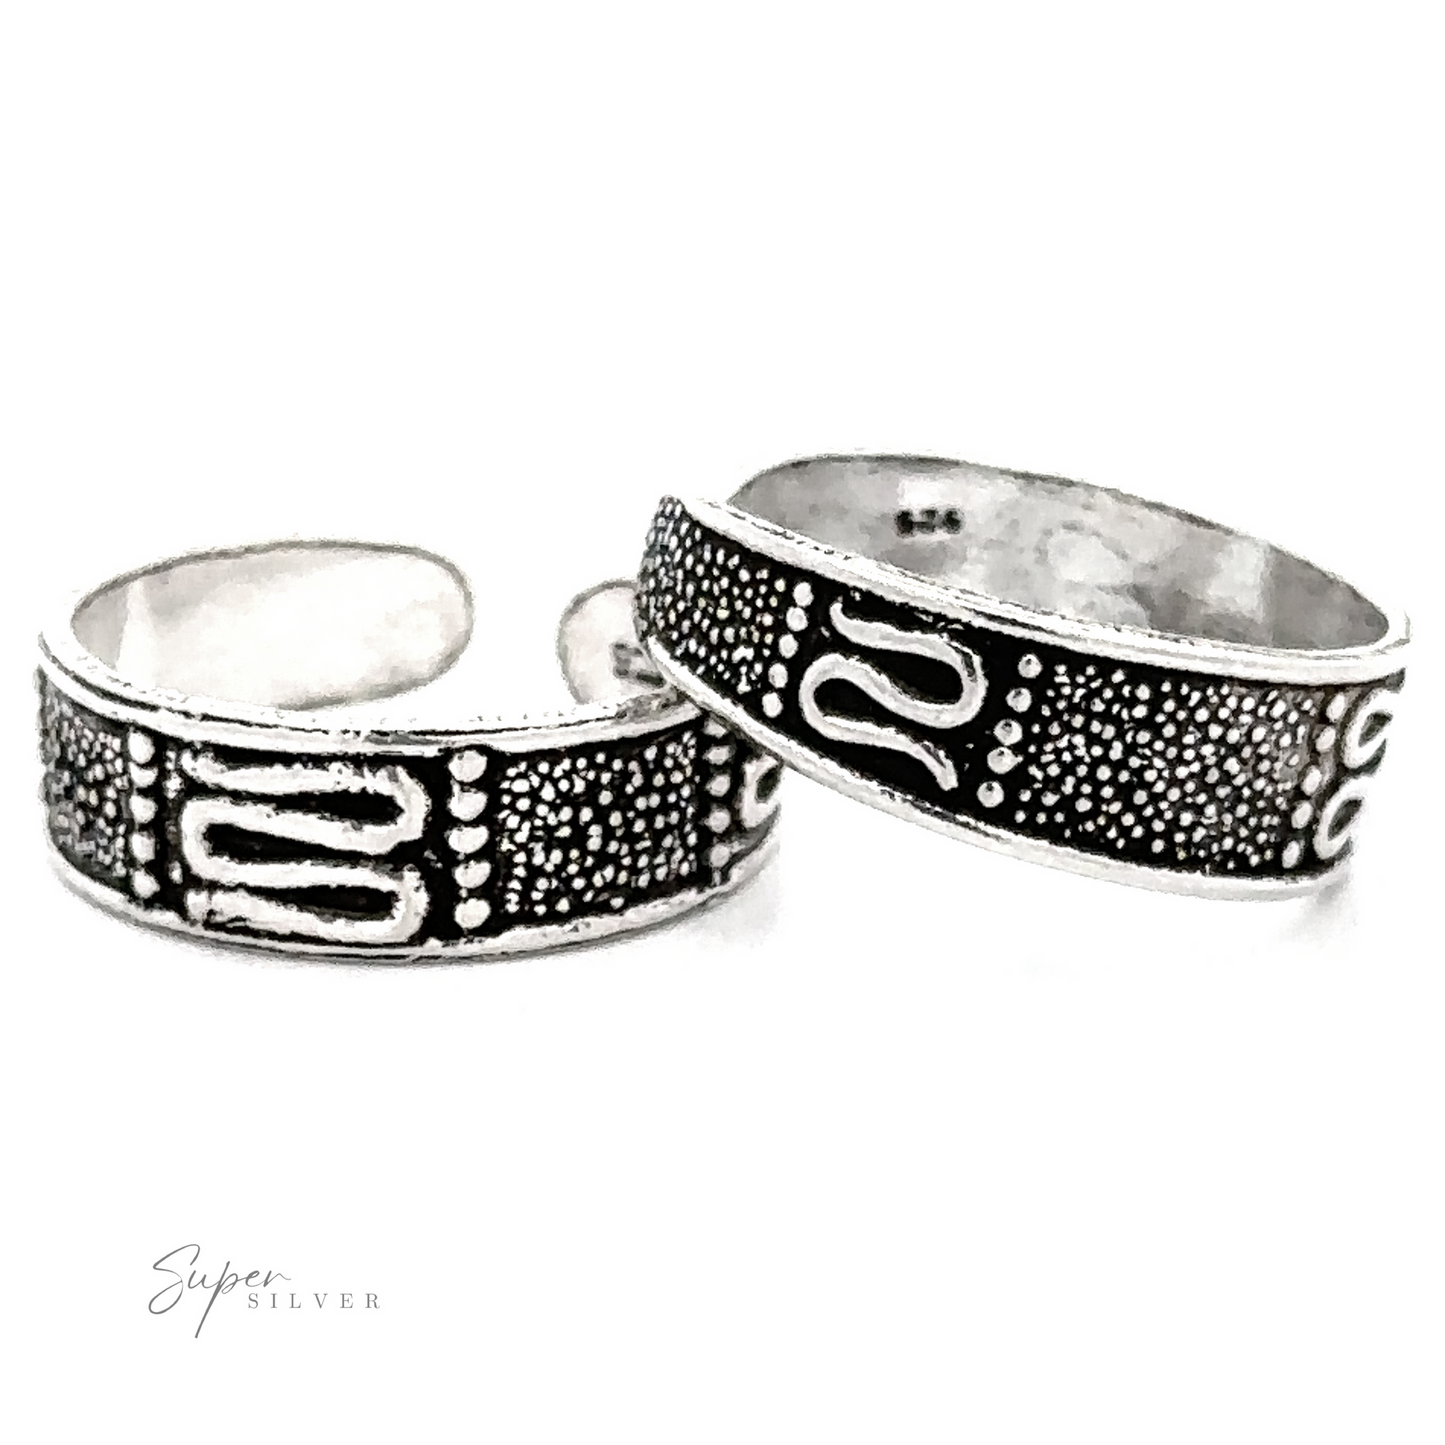 Two Bali Design Adjustable Toe Rings with intricate bead and line patterns on a white background.